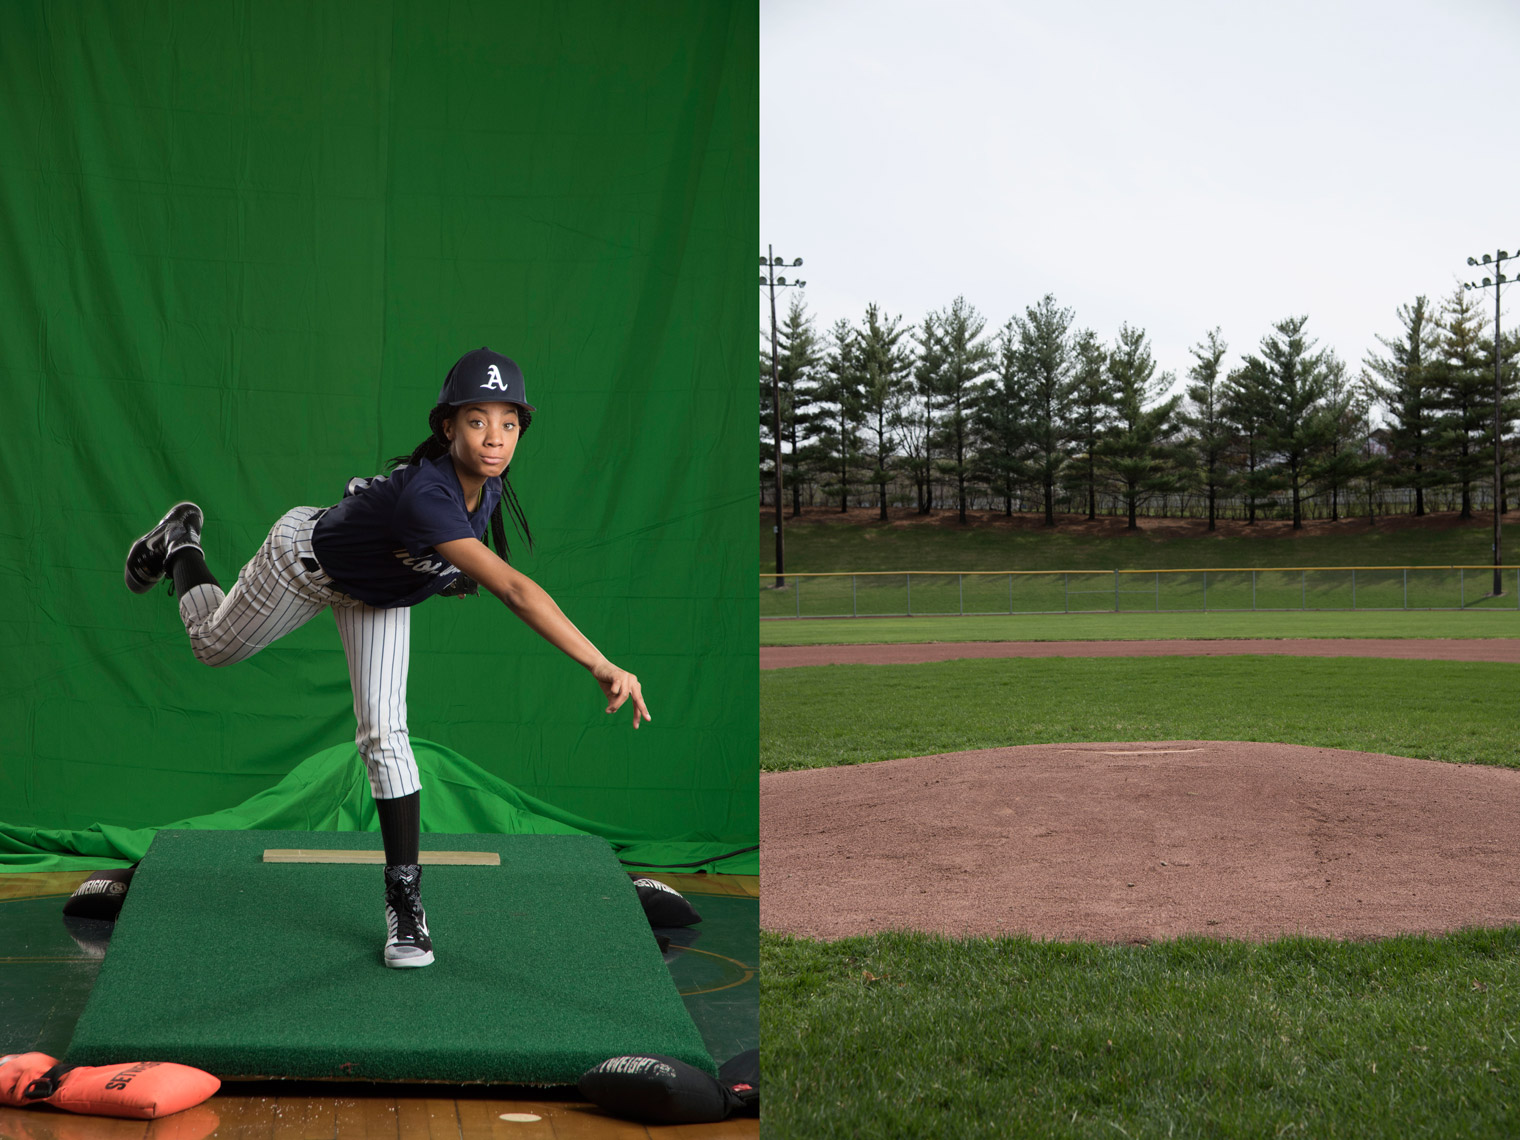 Baseball-Pitch-Sequence-for-Franklin-Institute-photographer-Ryan-Donnell-Originals